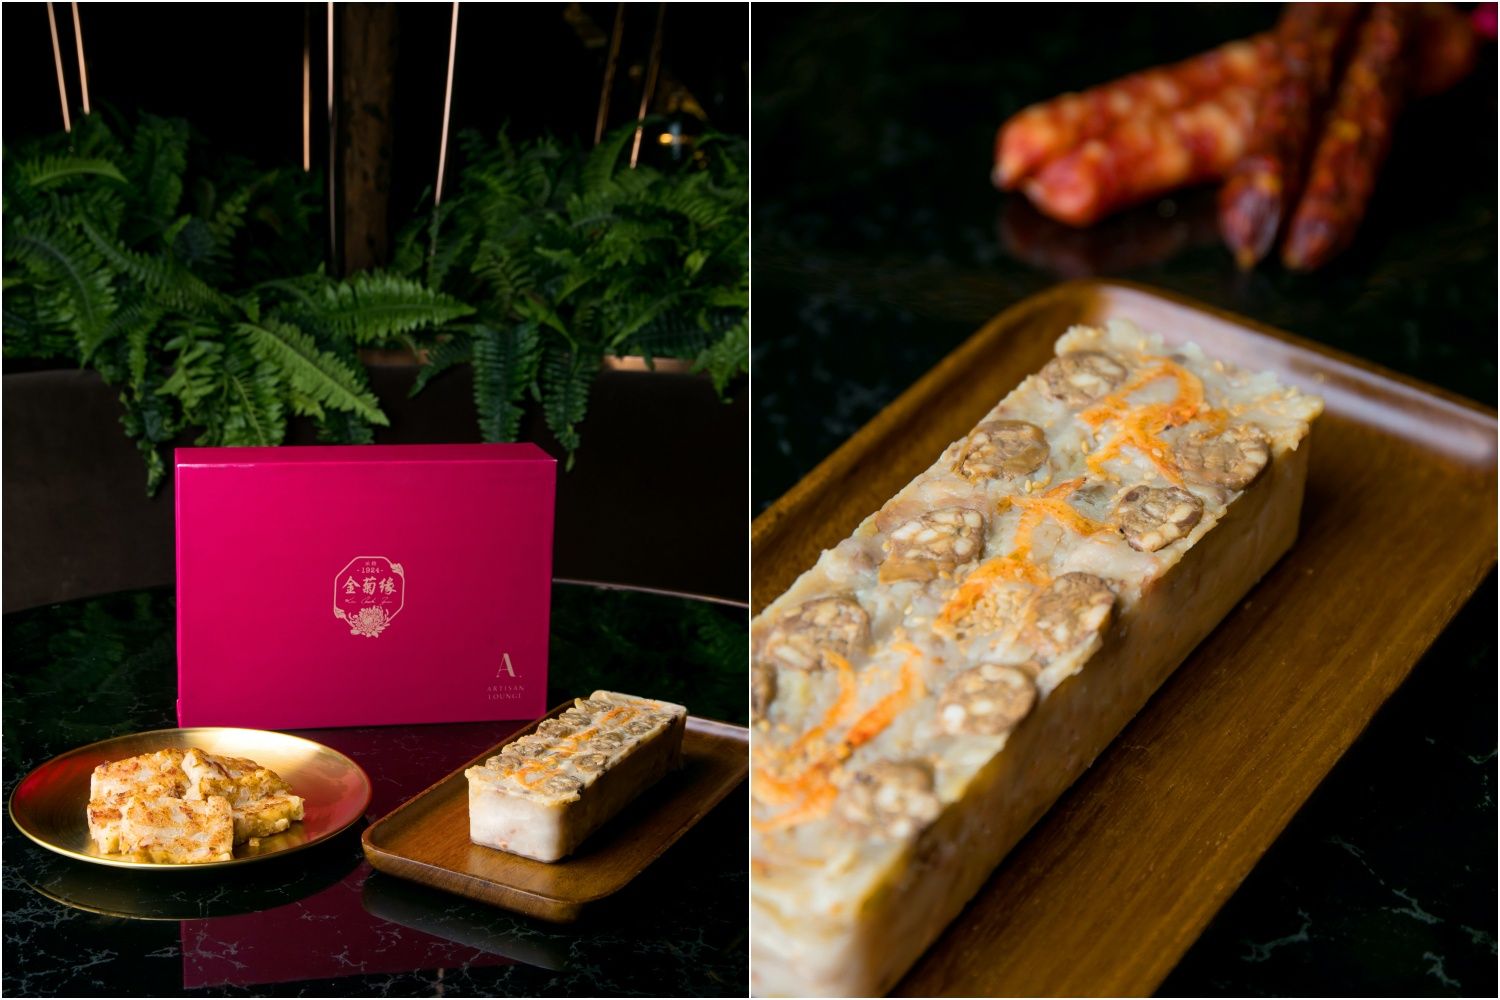 The Artisan Turnip Cake with French Foie Gras Preserved Meat, exclusively sold at Artisan Lounge at K11 Musea